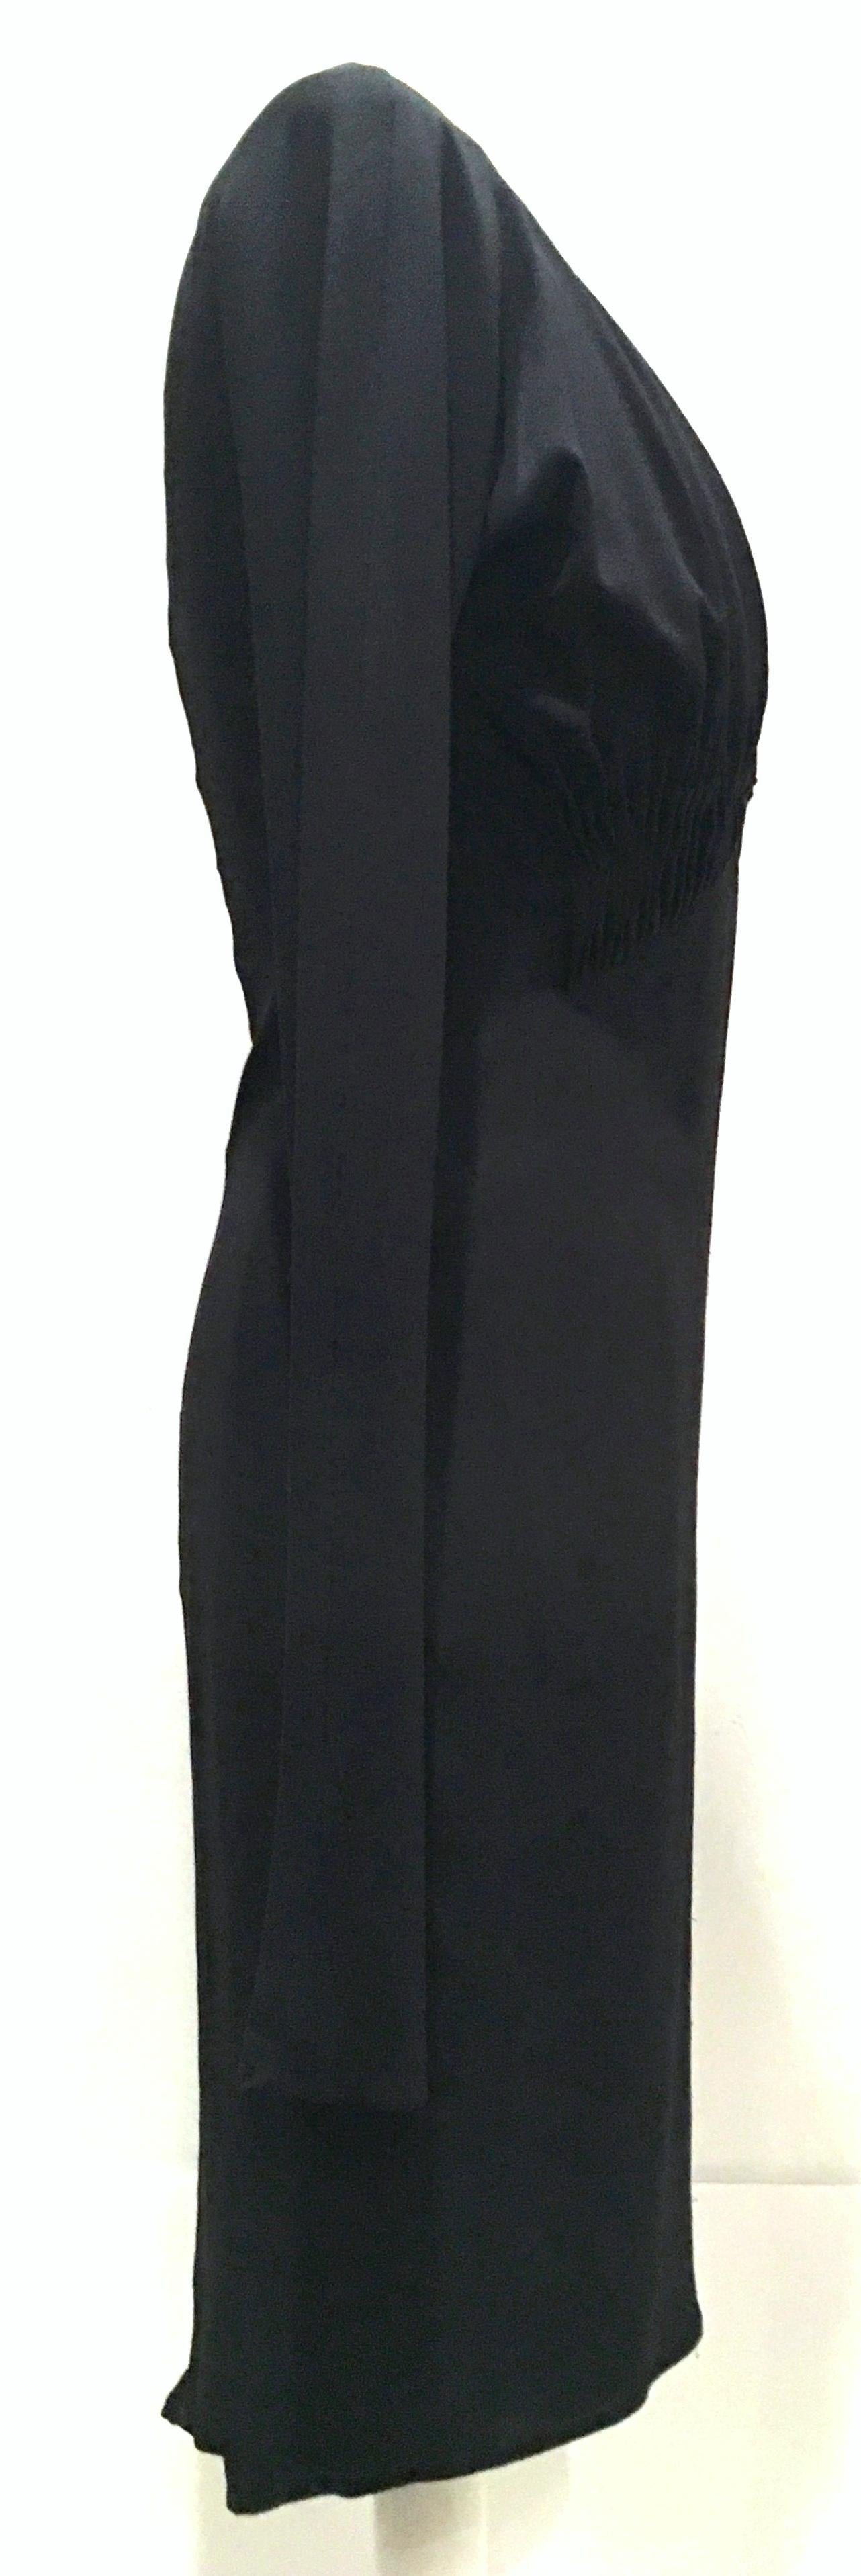 2003 Italian Silk Long Sleeve Deep Plunge Black Dress By Tom Ford For Gucci-42 For Sale 2